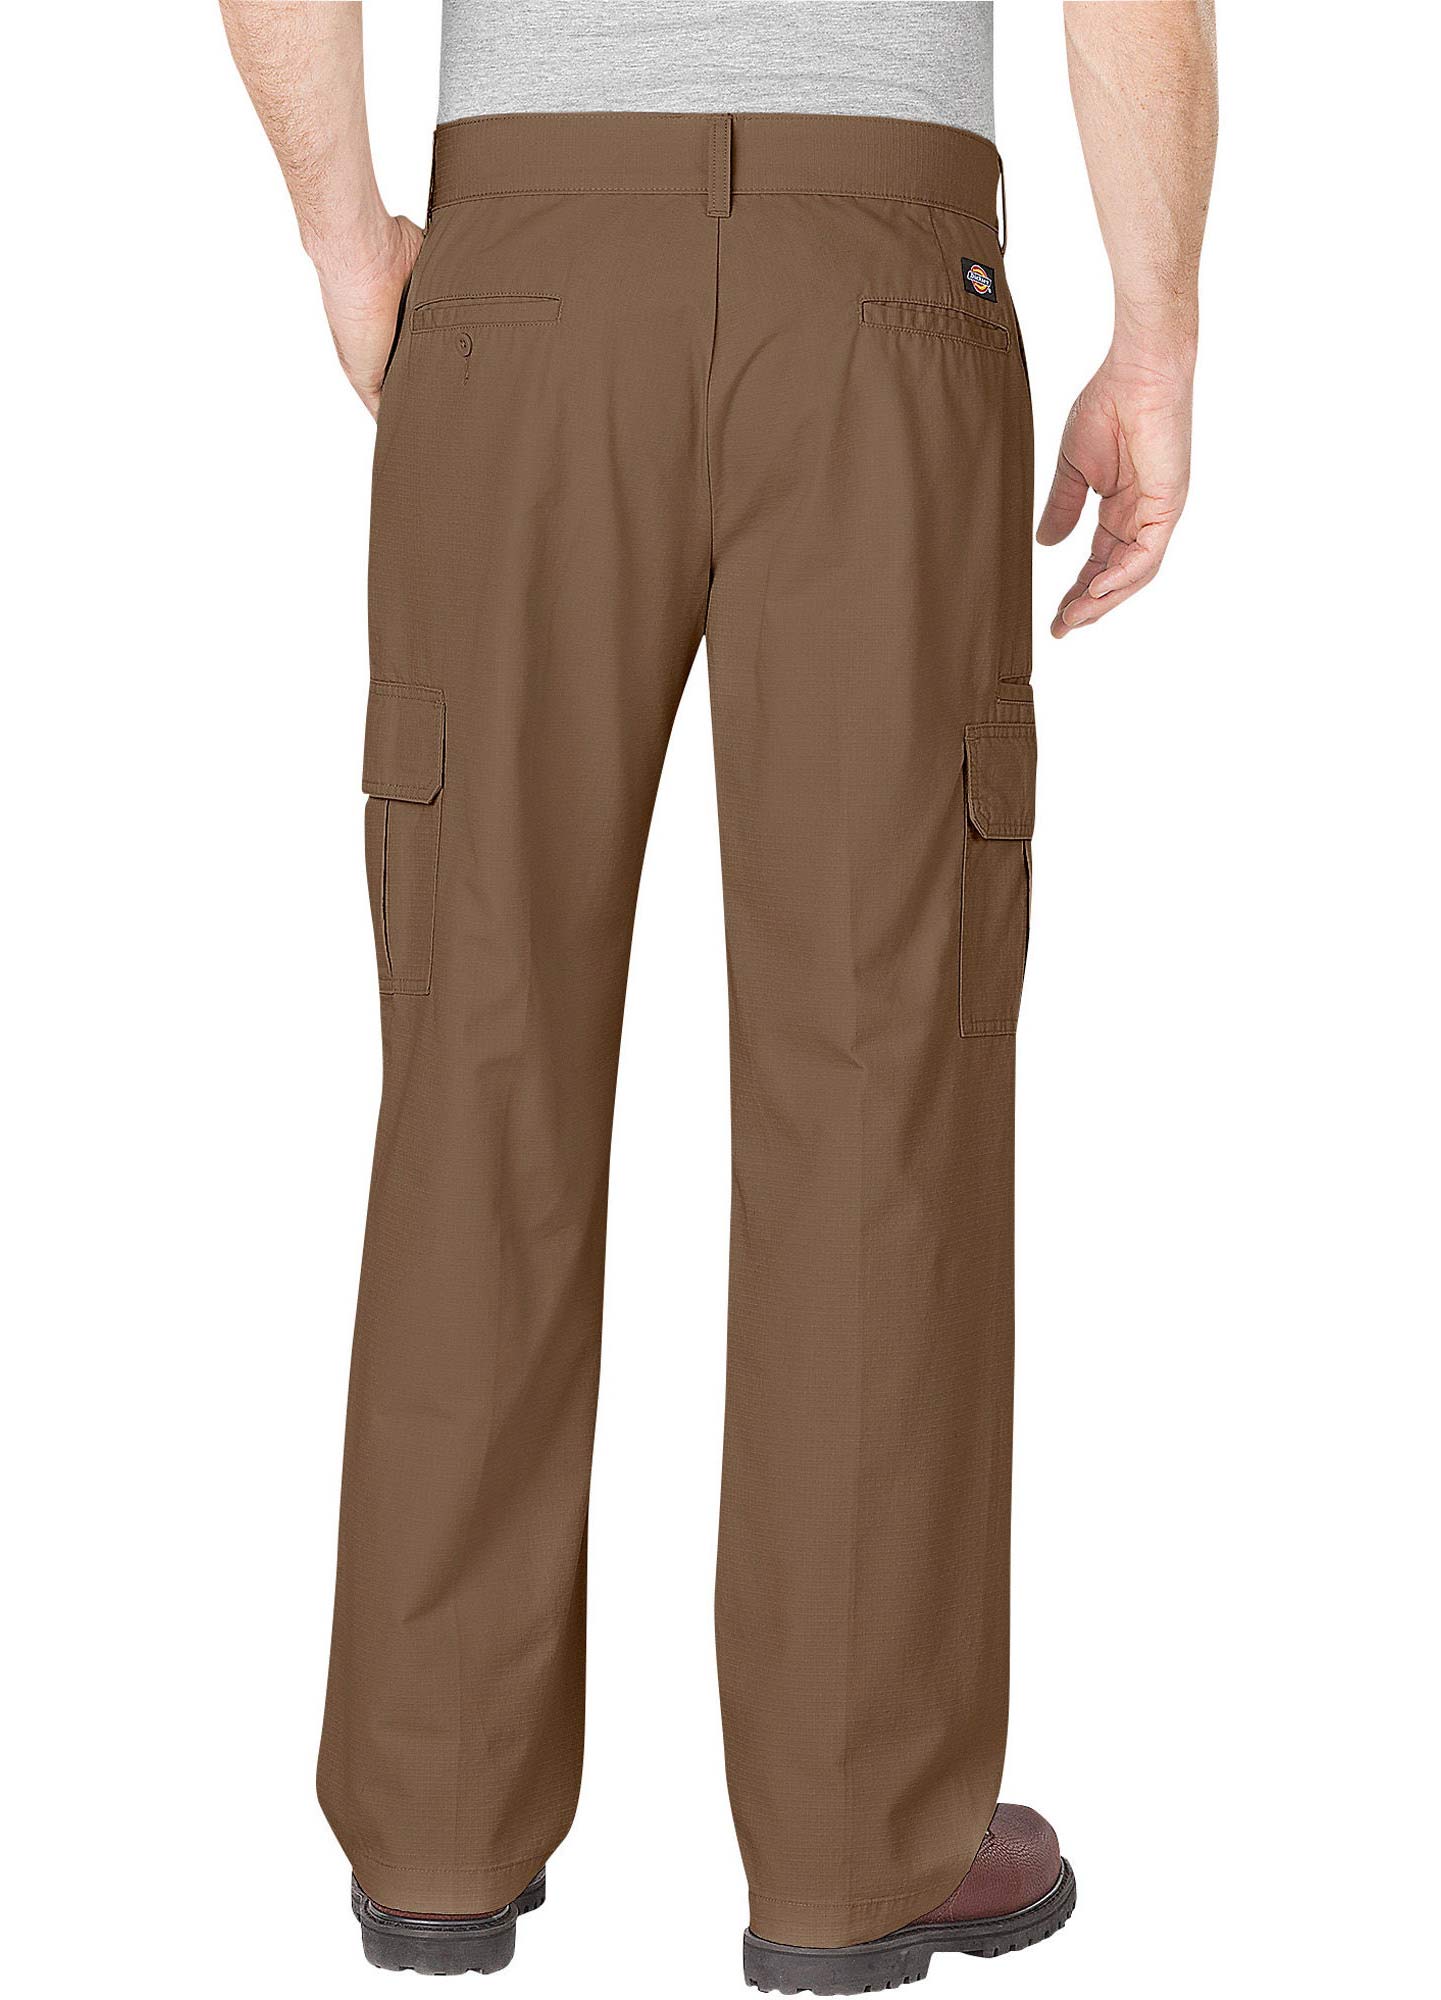 Dickies Relaxed Fit Lightweight Ripstop Cargo Pant - WP351